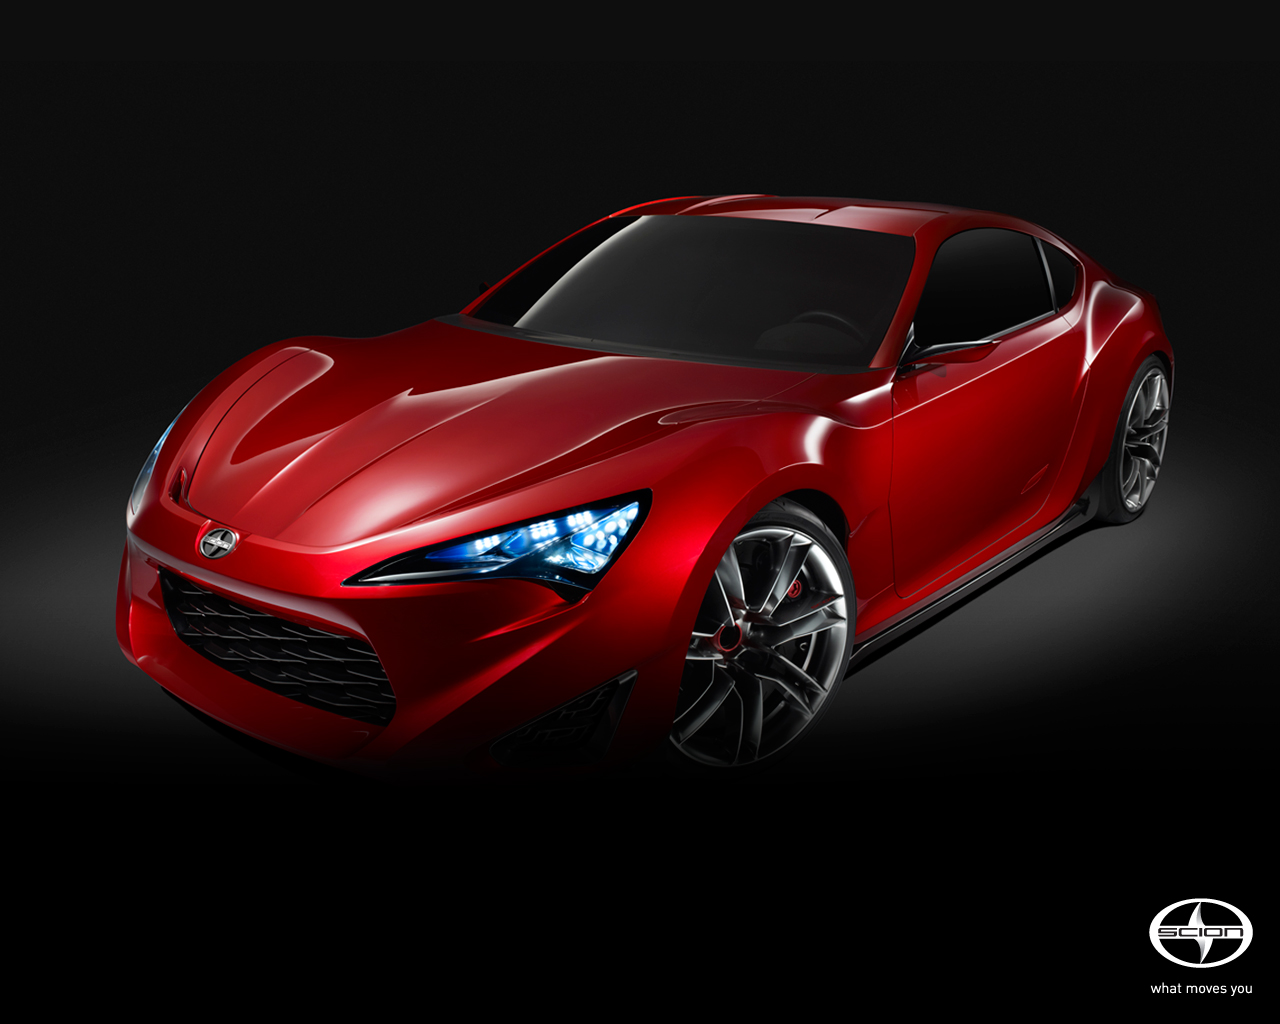 2013 Scion FR-S Wallpapers - Car Wallpapers